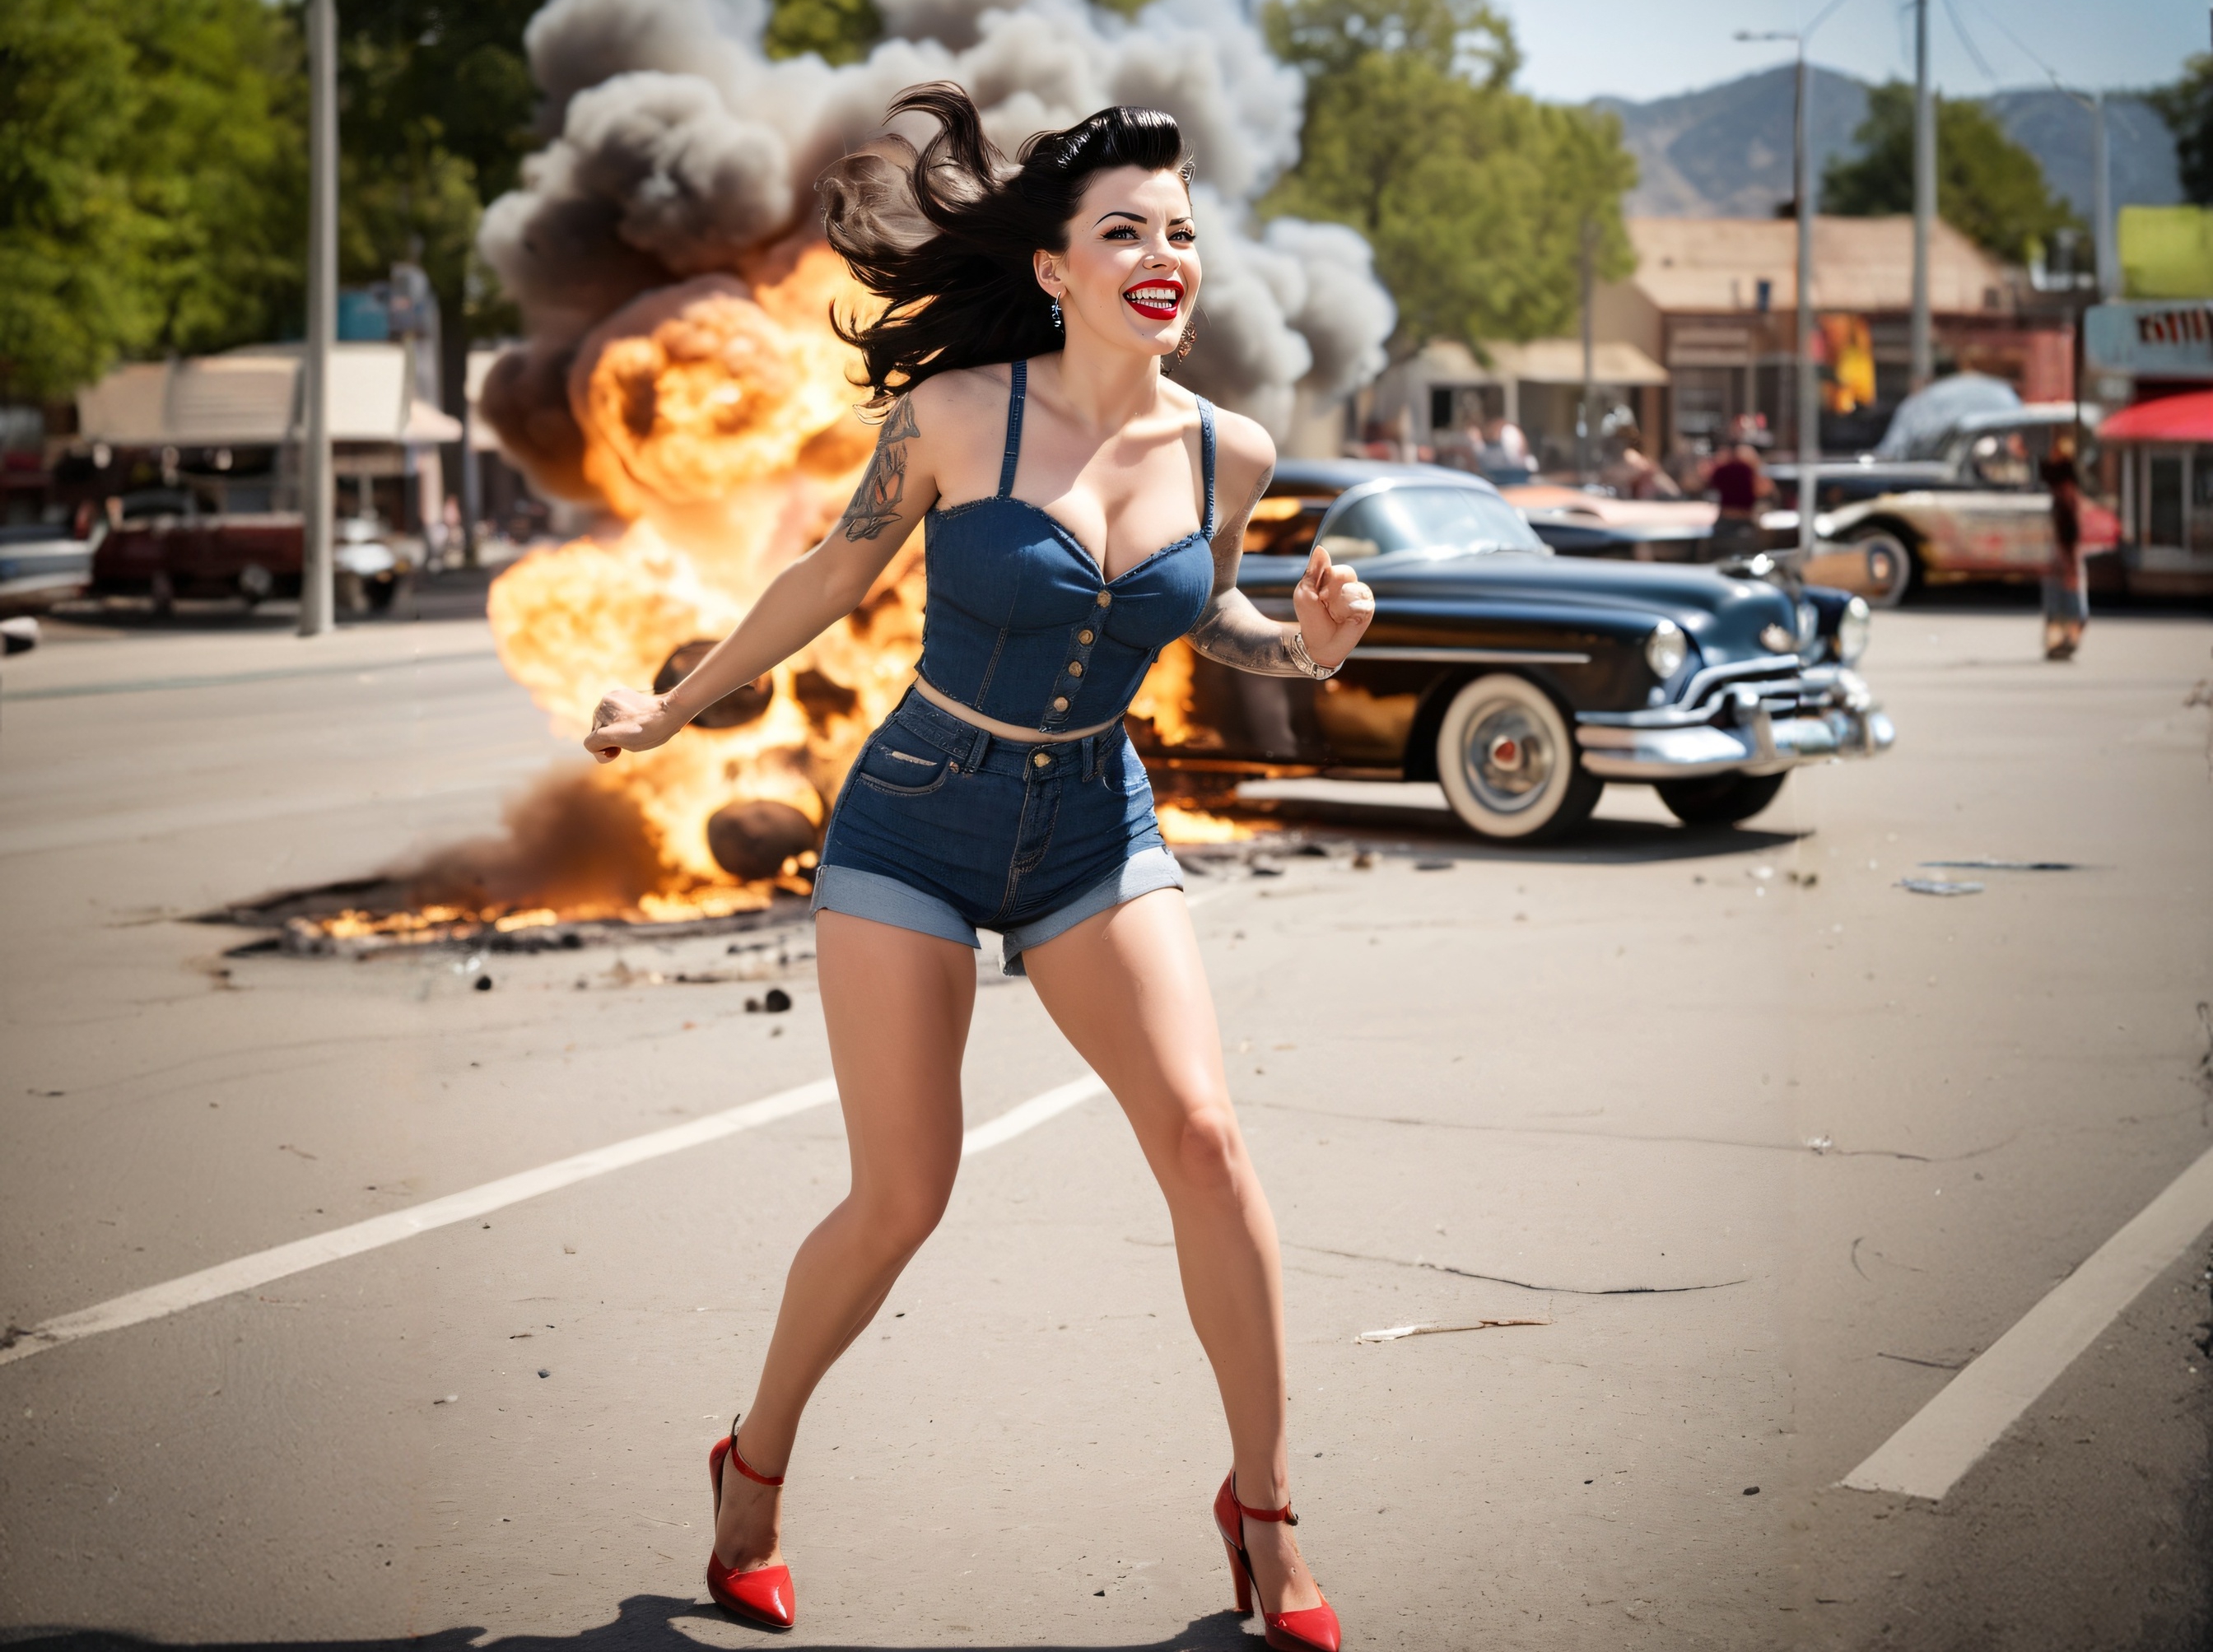 The girl and the car explosion